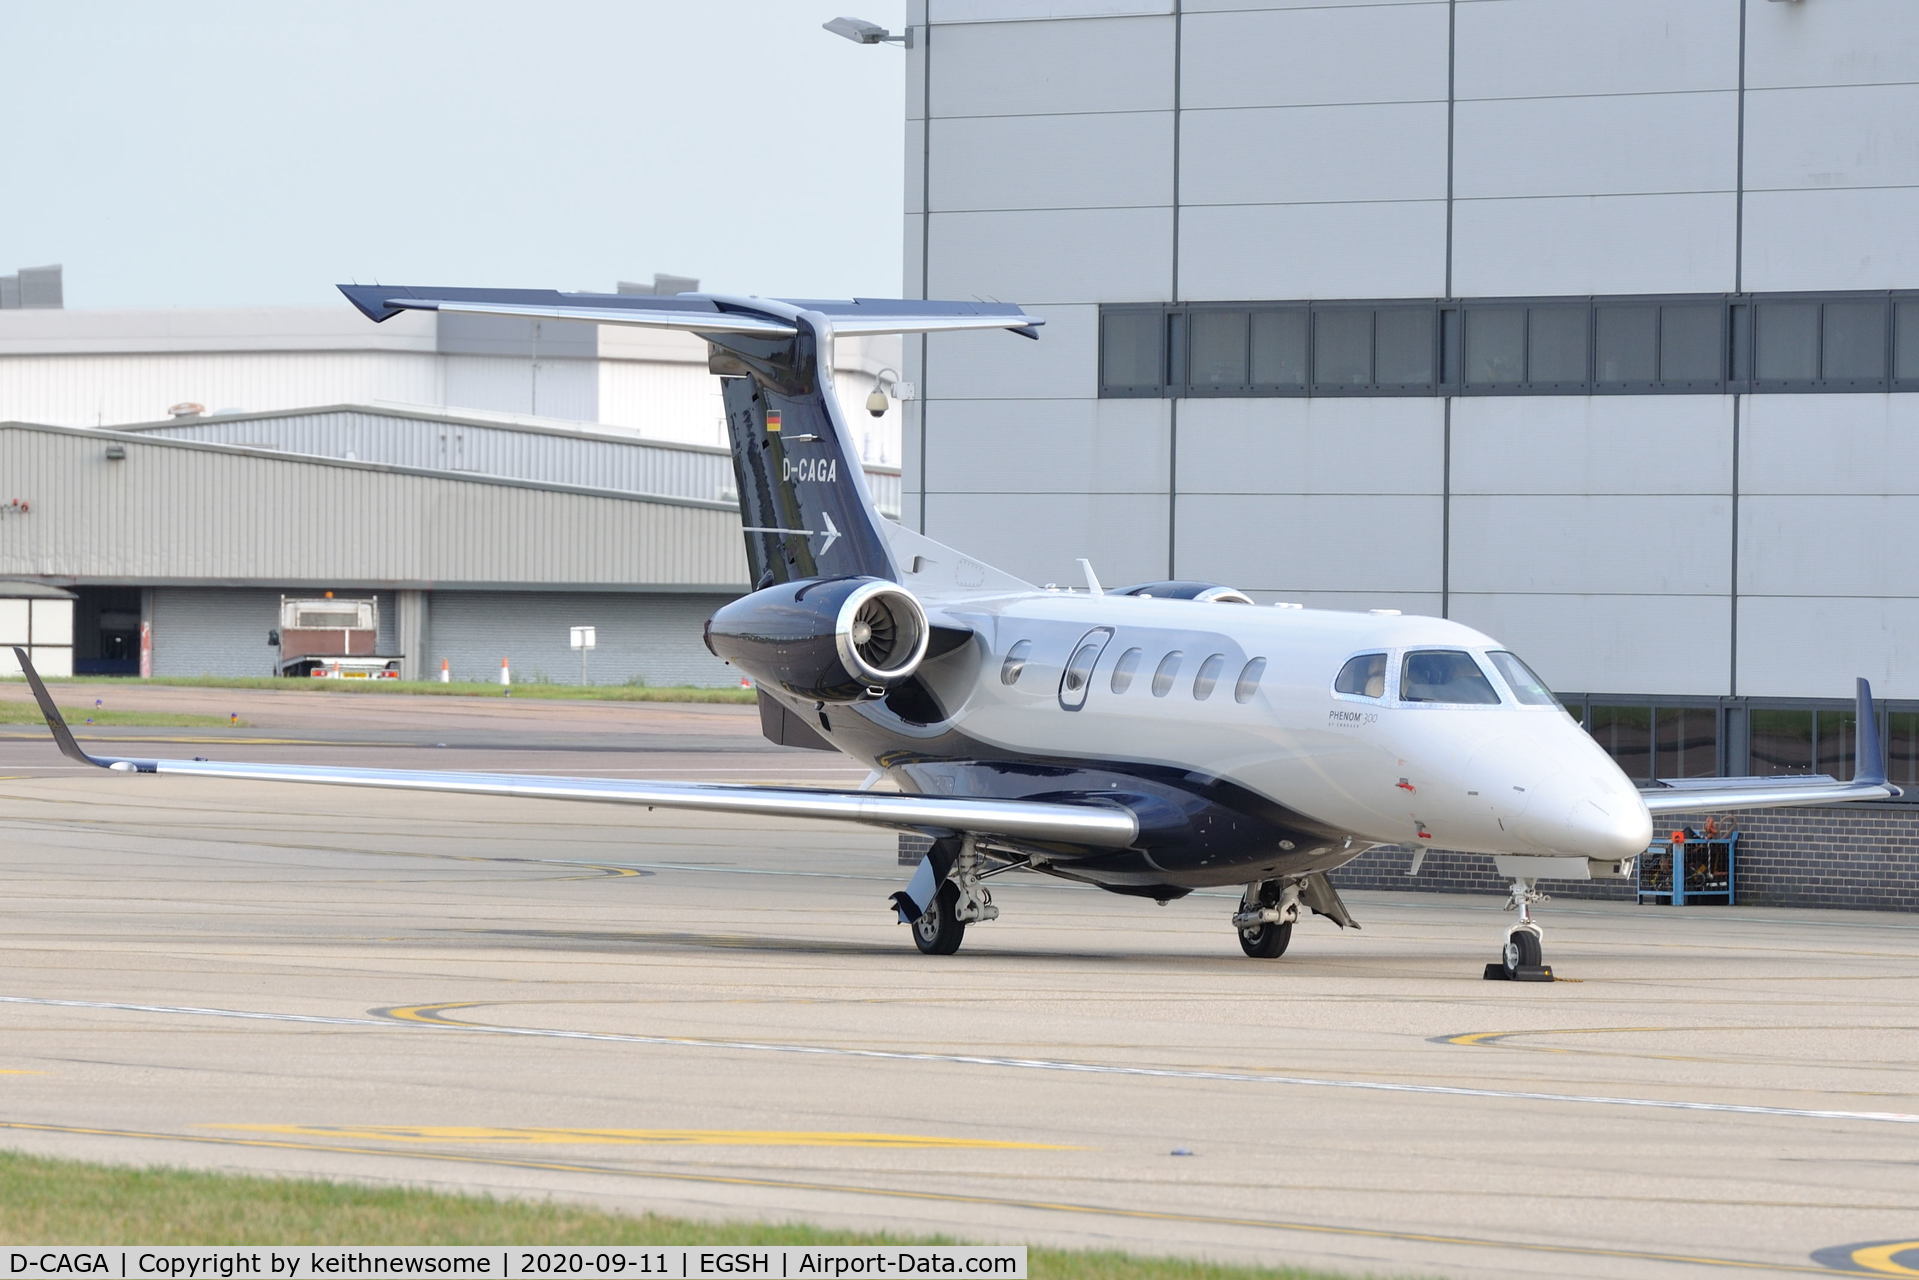 D-CAGA, 2017 Embraer EMB-505 Phenom 300 C/N 50500376, Parked at Norwich.